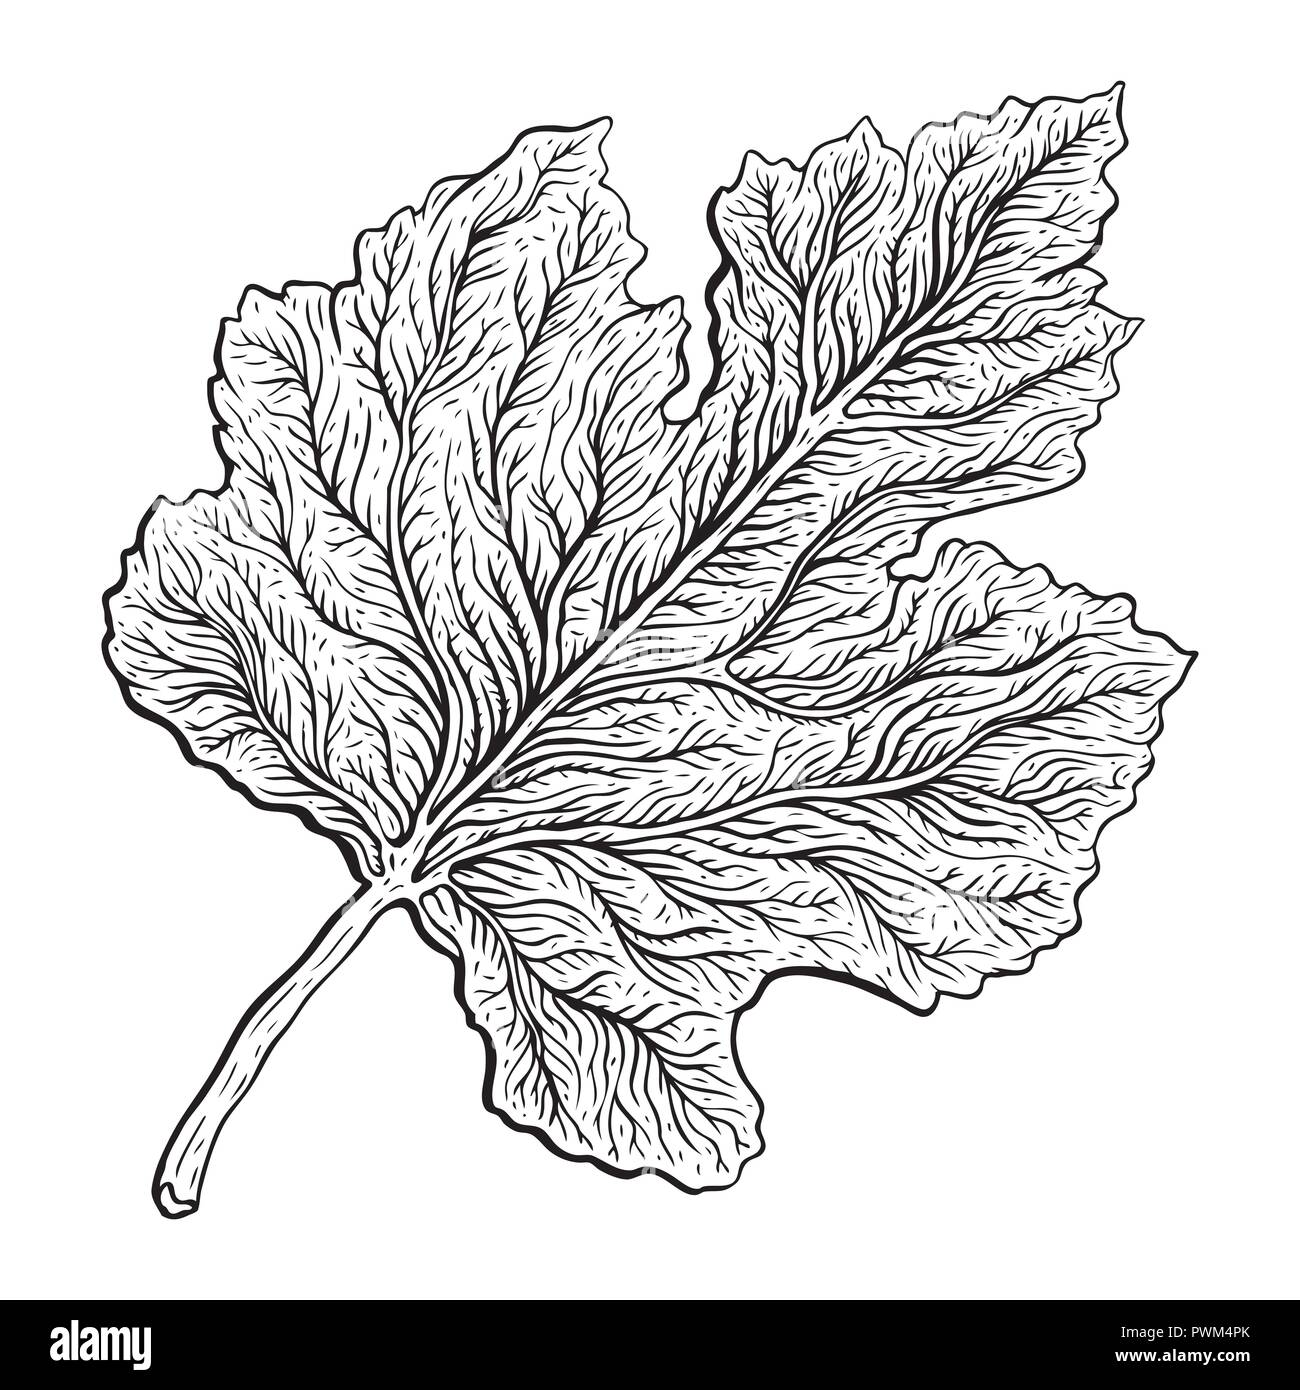 Artfully Outdoorsy in the Montessori Room: Realistic Leaf Drawing from the  Botany Cabinet! | Magical Movement Company: Carolyn's blog